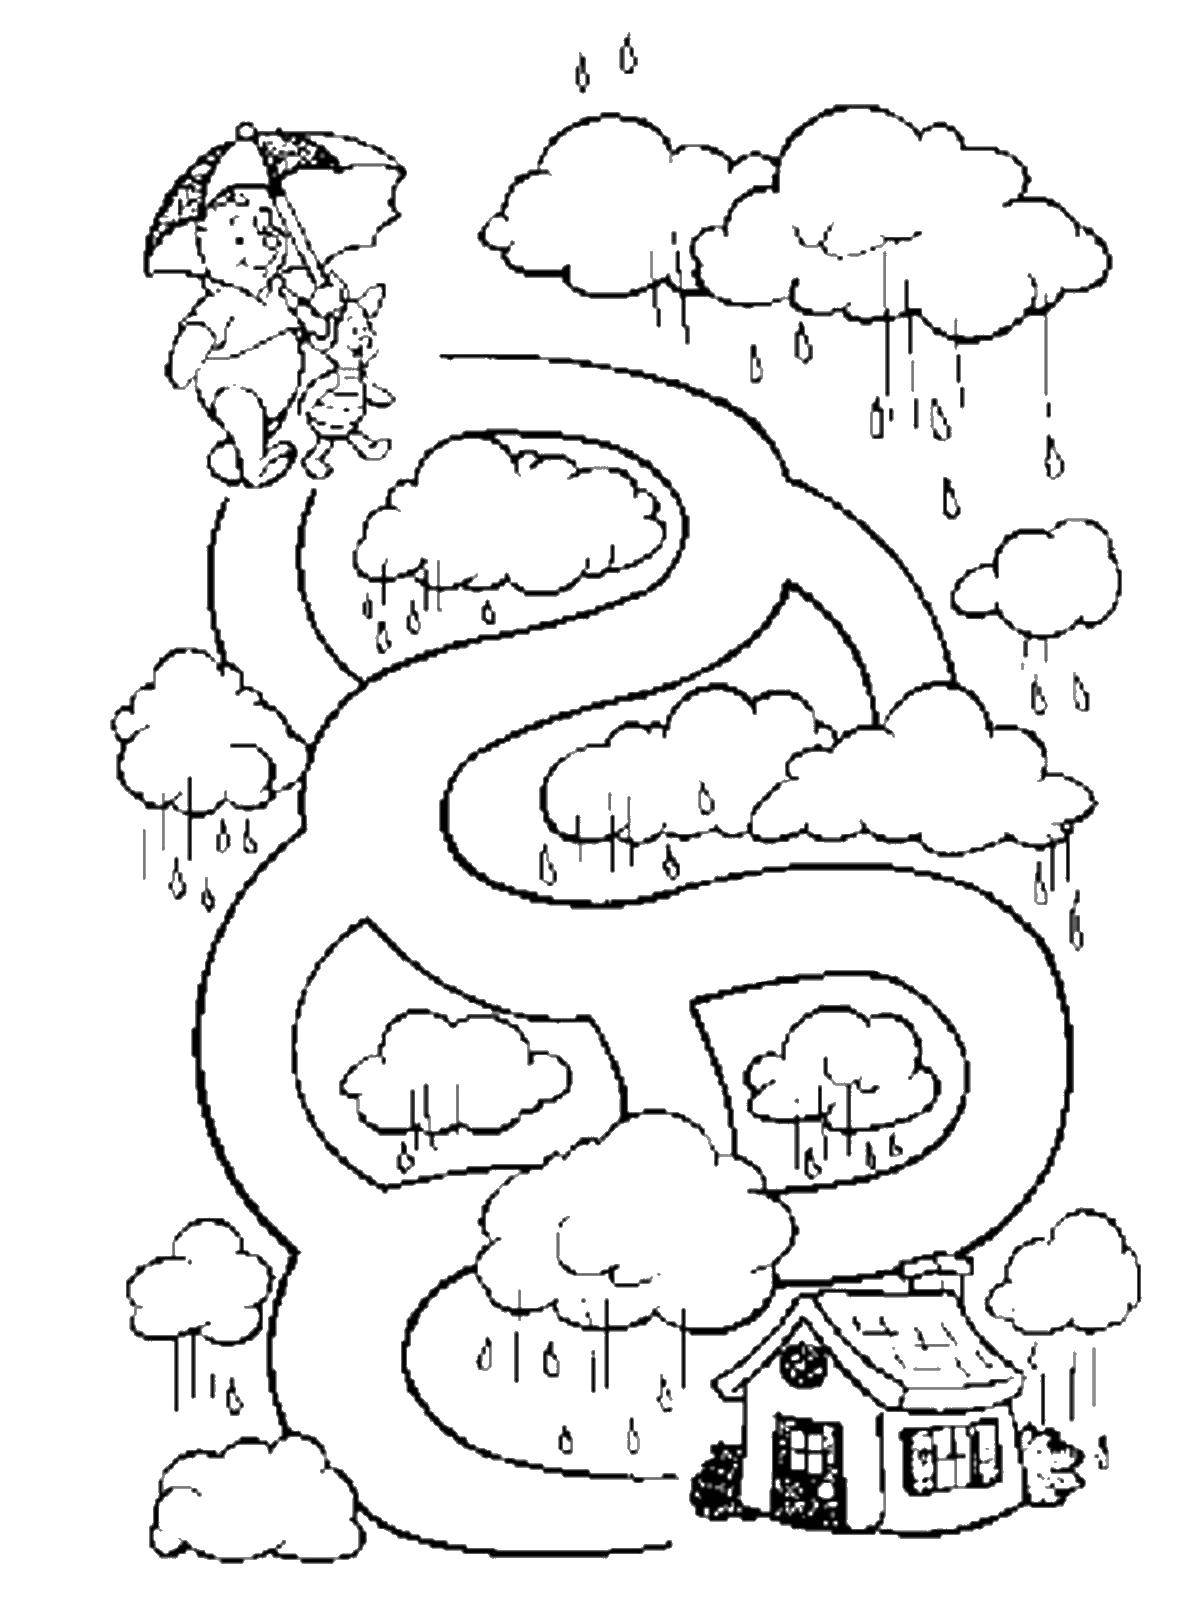 Coloring Winnie the Pooh goes home. Category the labyrinth. Tags:  the labyrinth.